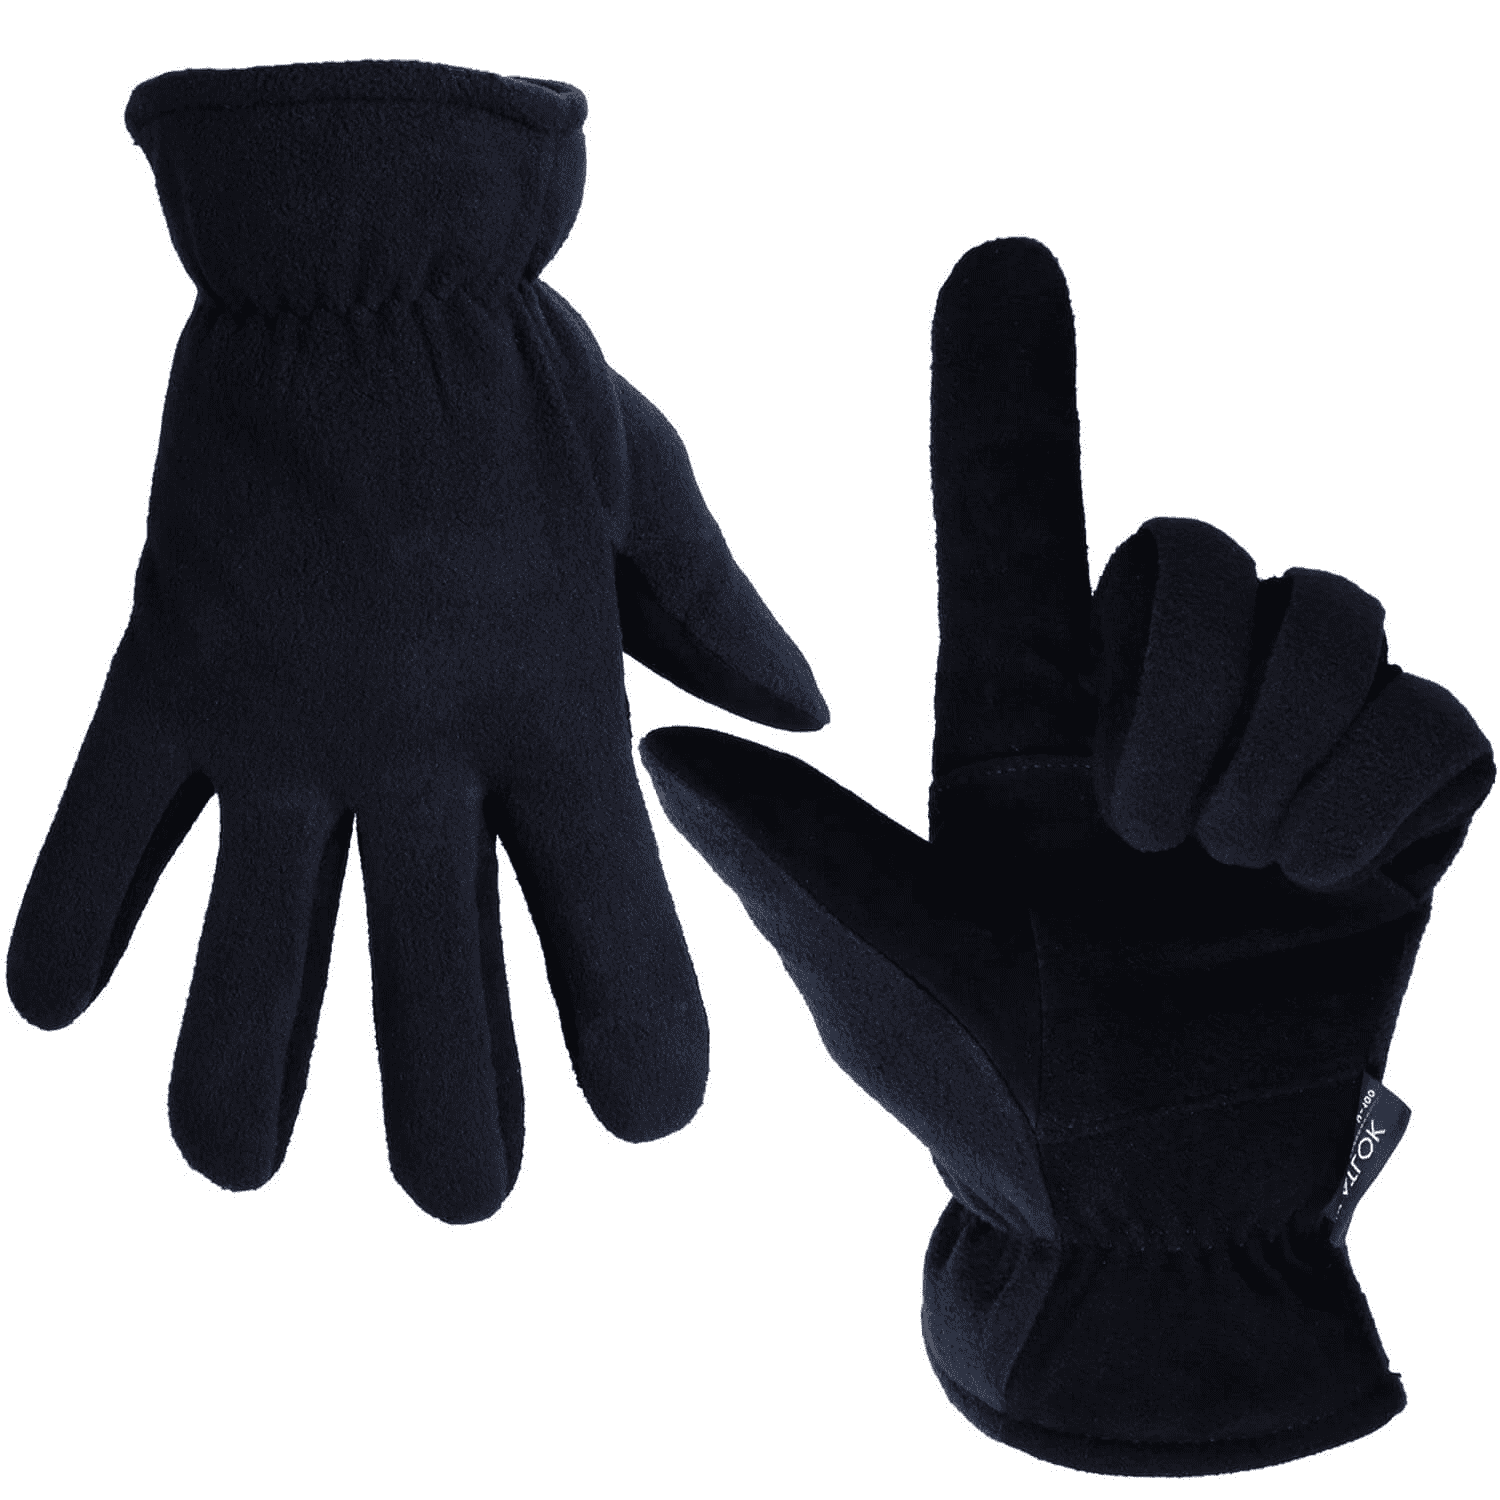 MoKo Waterproof Cold Weather Thermal Winter Ski Gloves Mittens for Kids Toddlers 